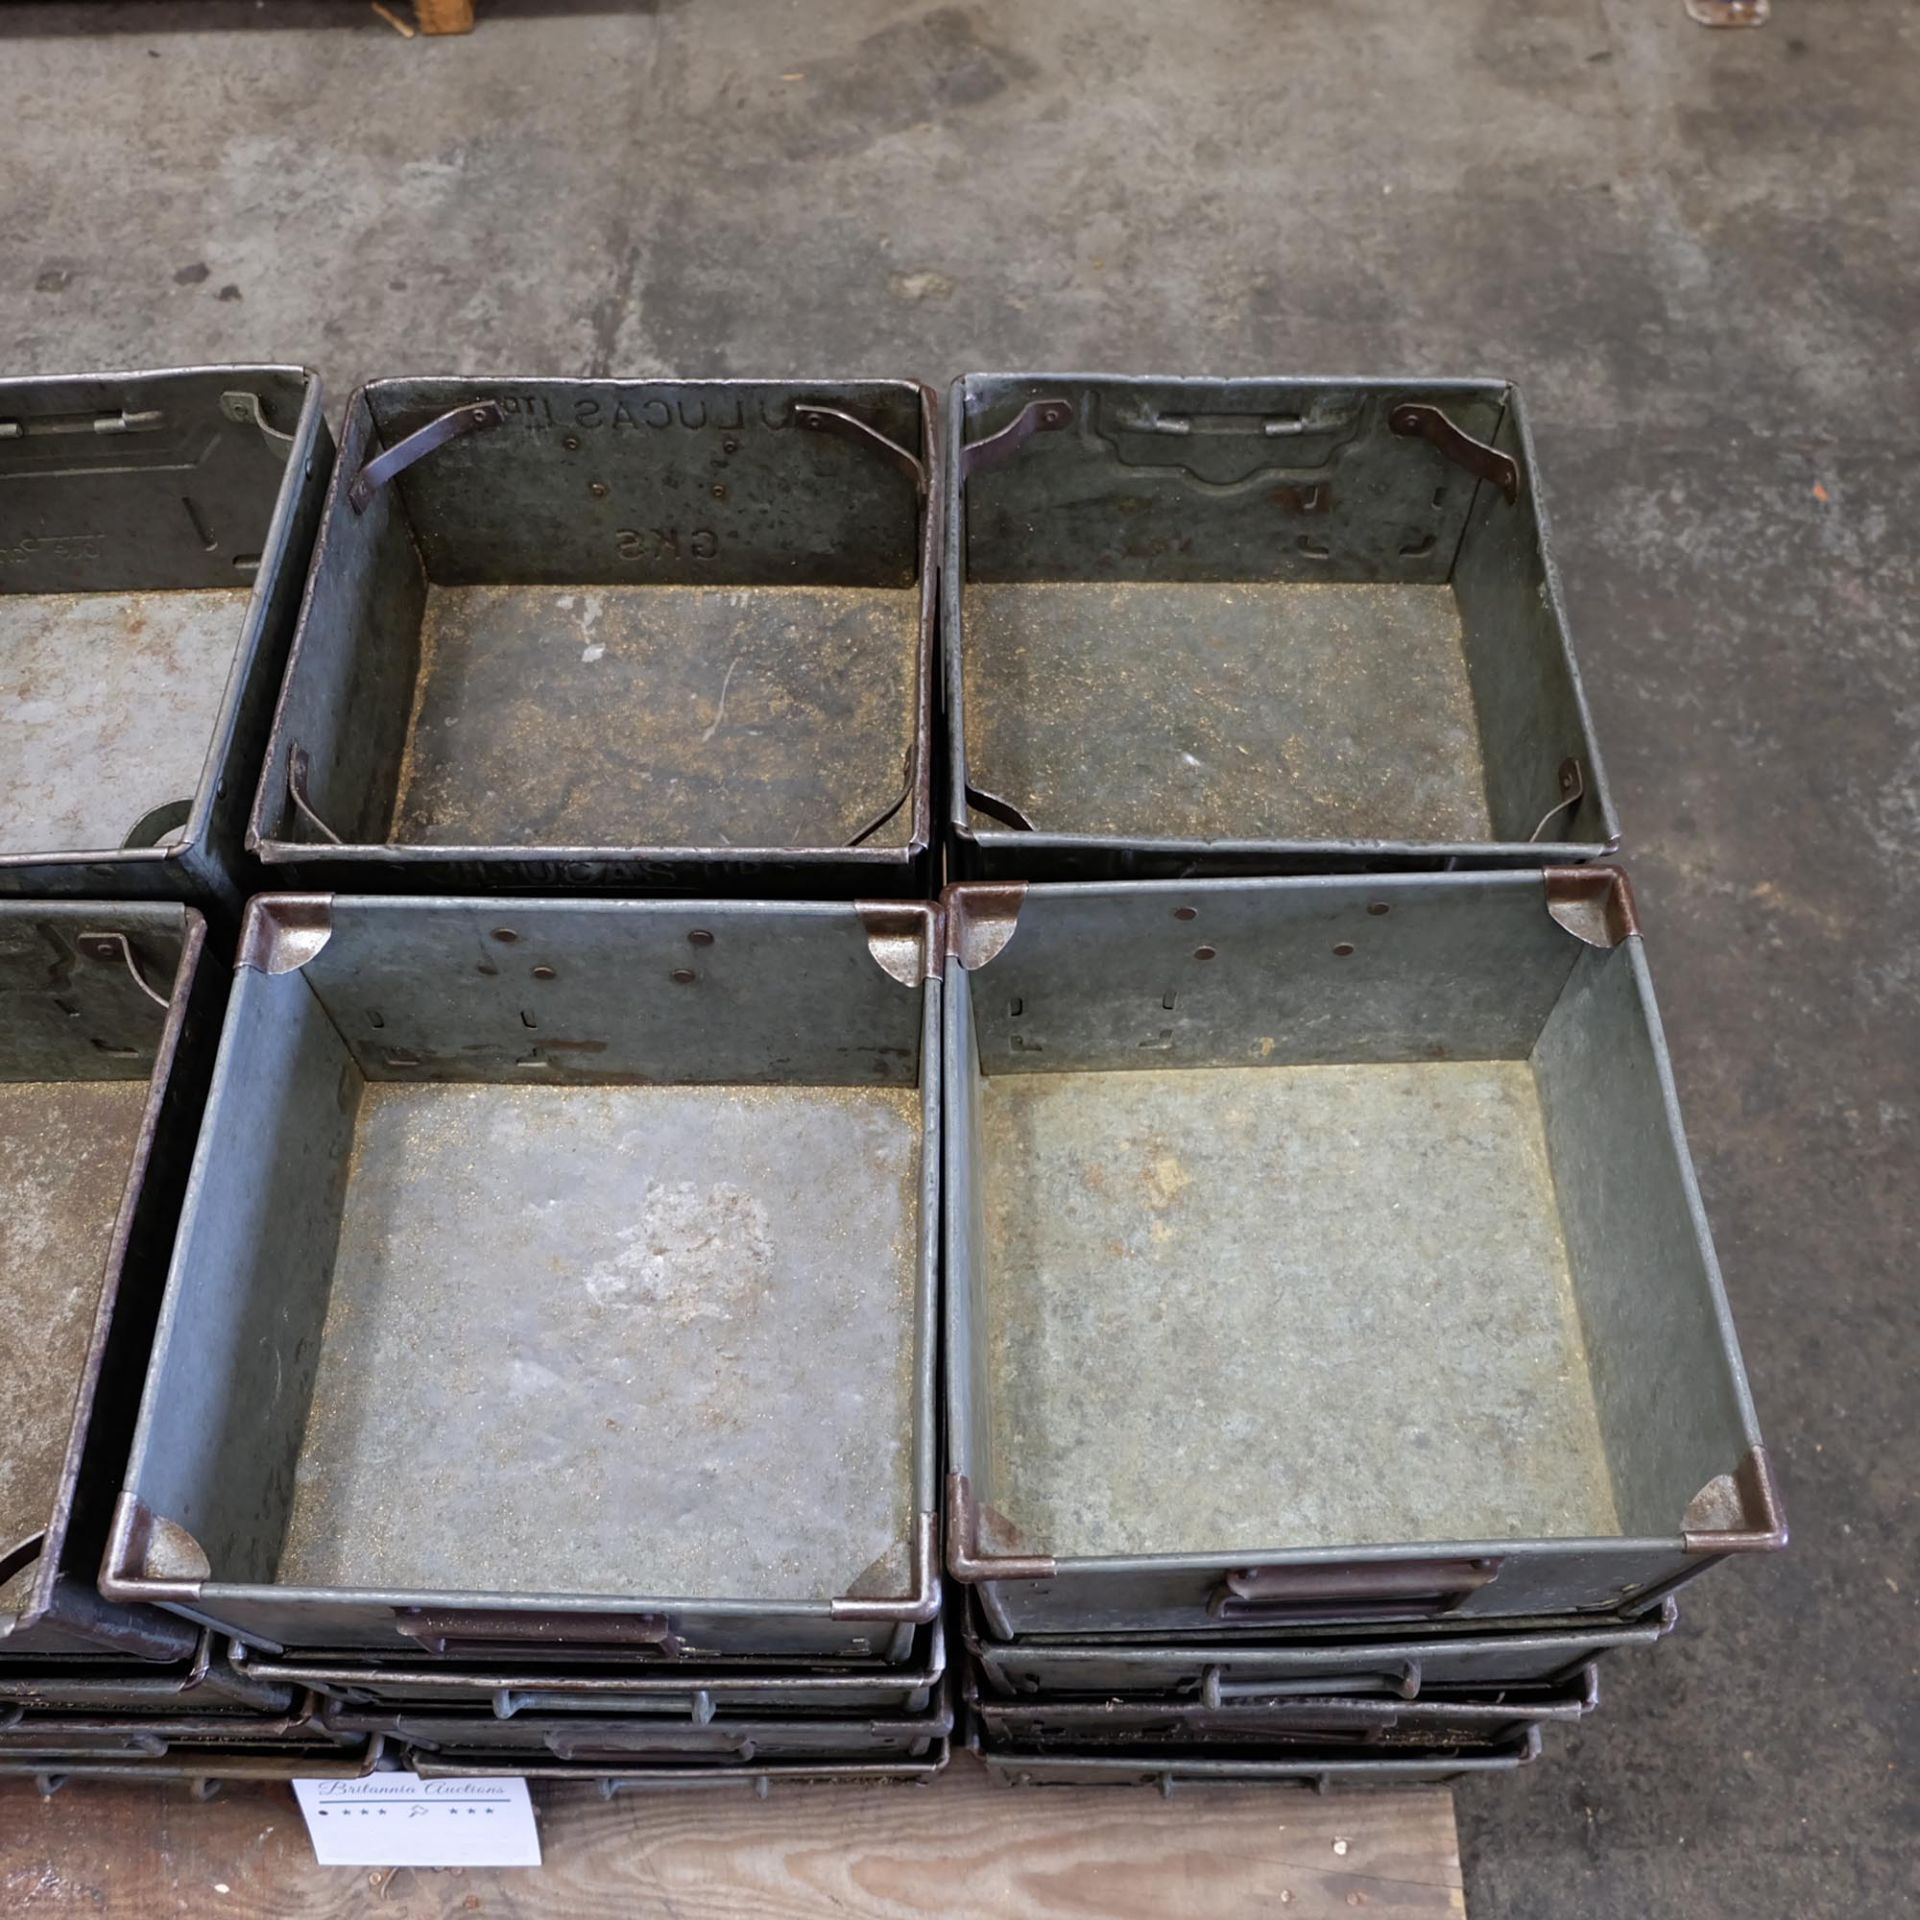 Quantity Of 32 Tote Bins With Handles. - Image 4 of 4